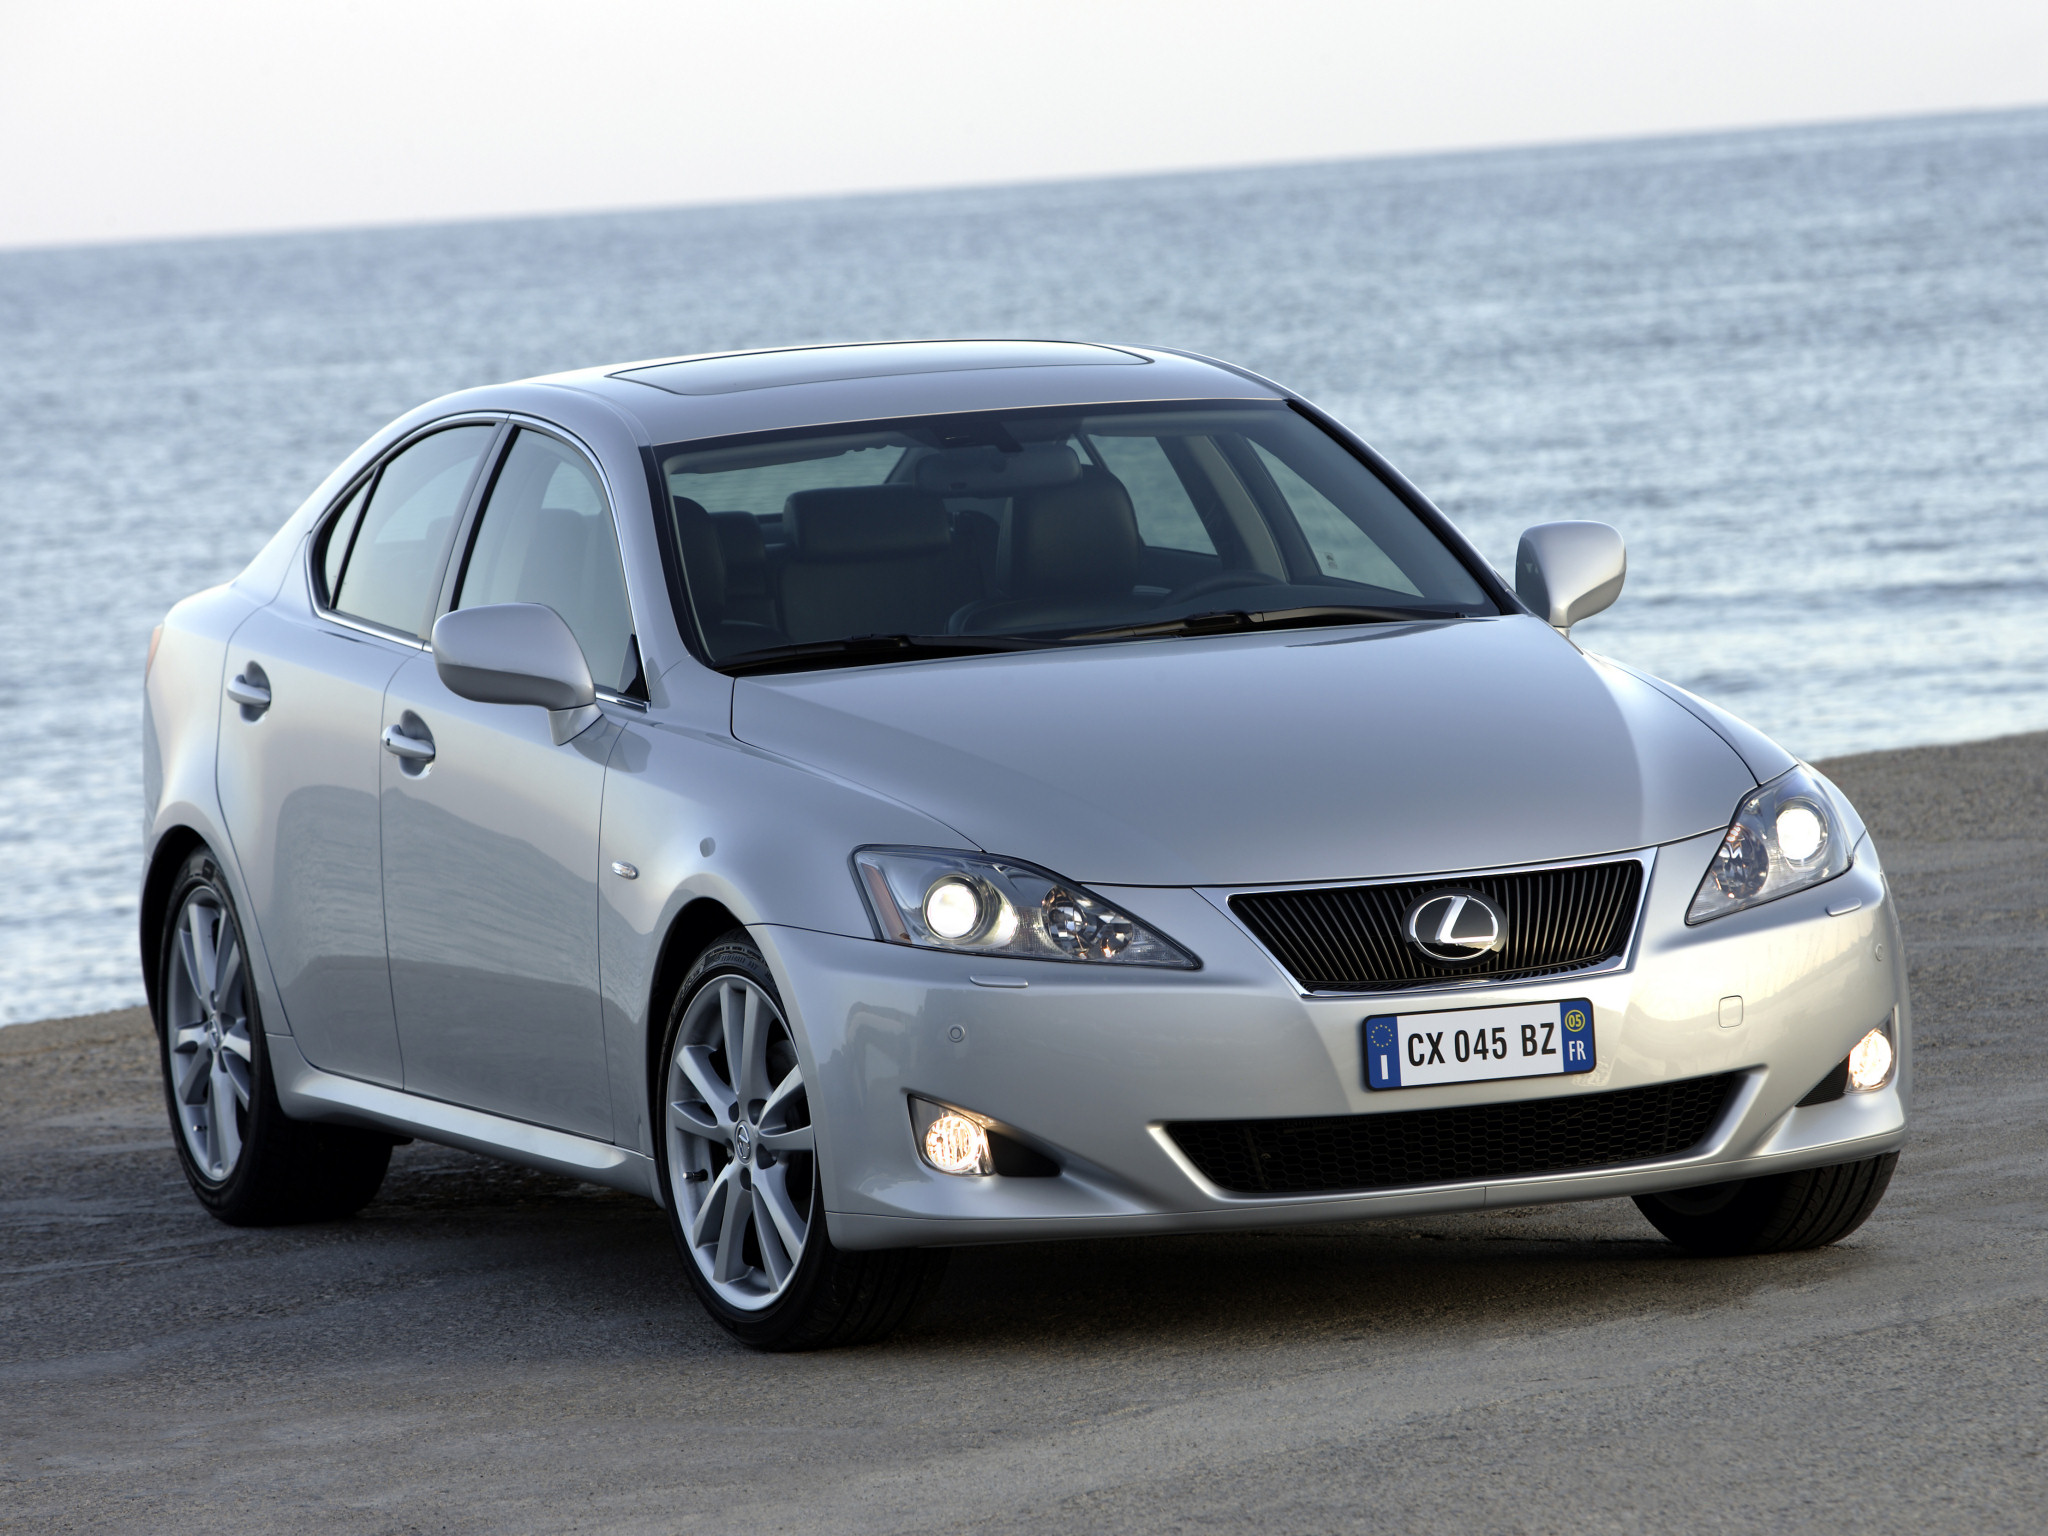 Car in pictures car photo gallery » Lexus IS 250 2005